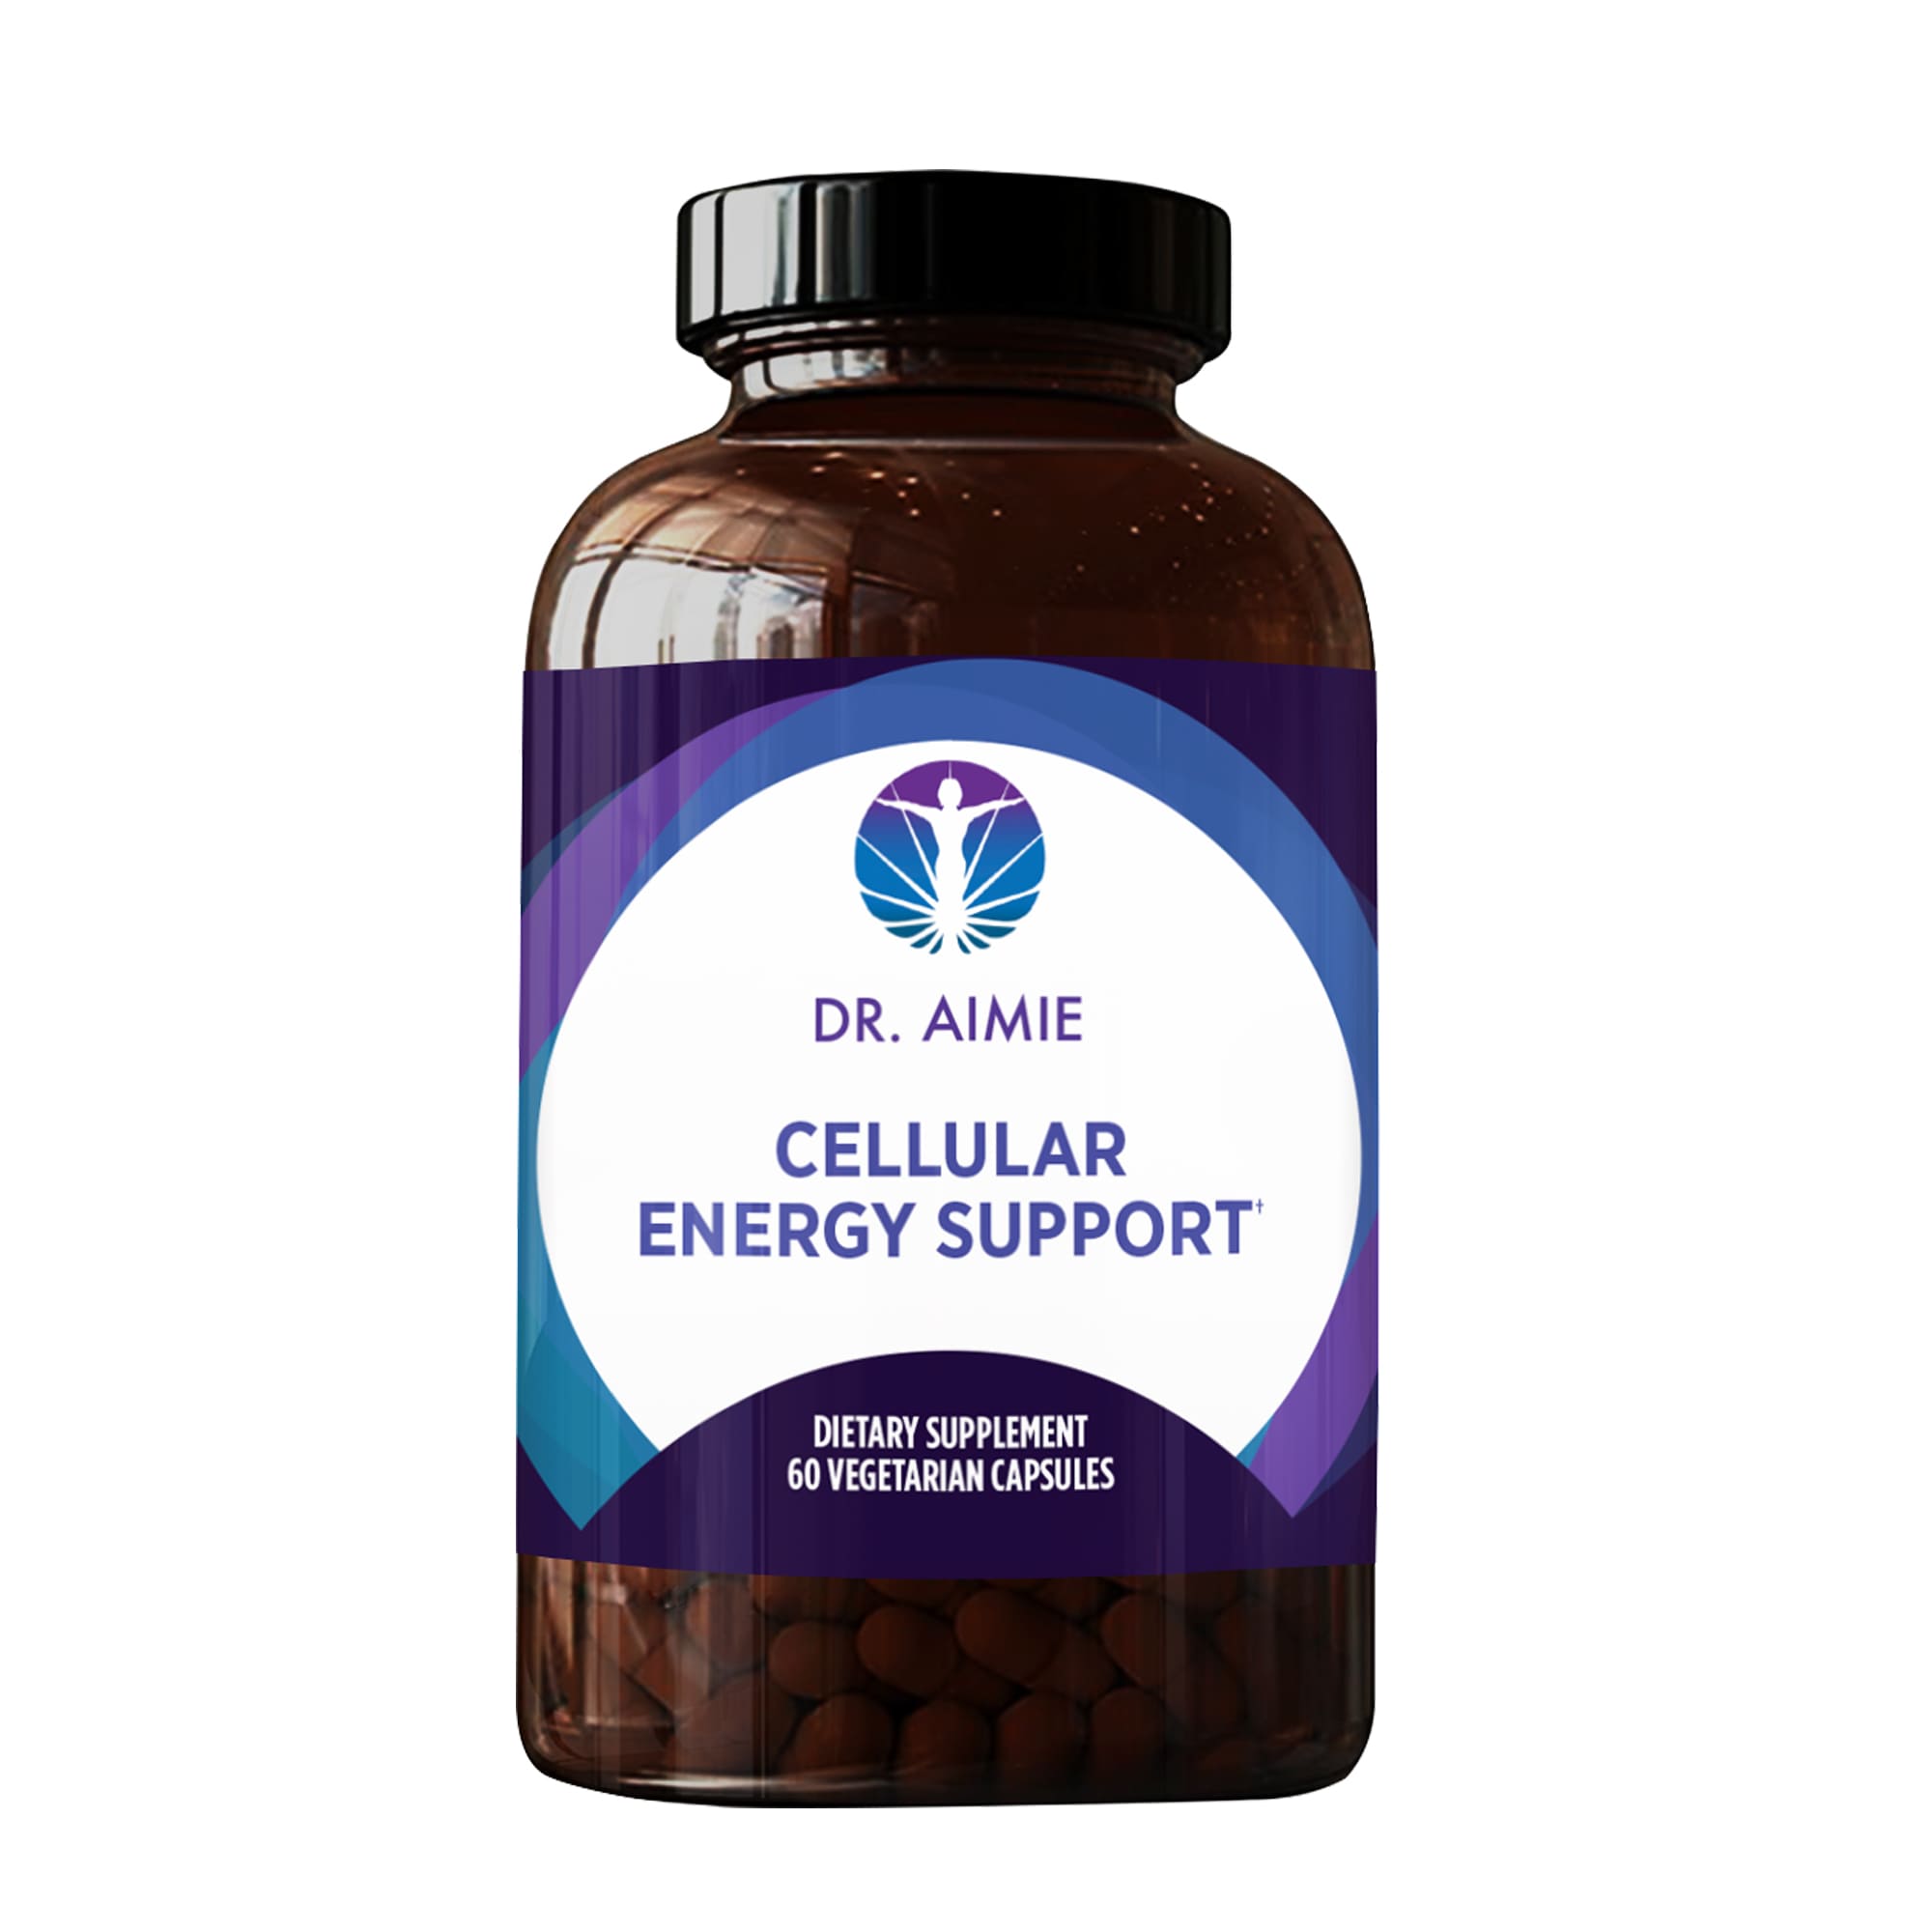 Cellular Energy Support - Trauma Healing Accelerated